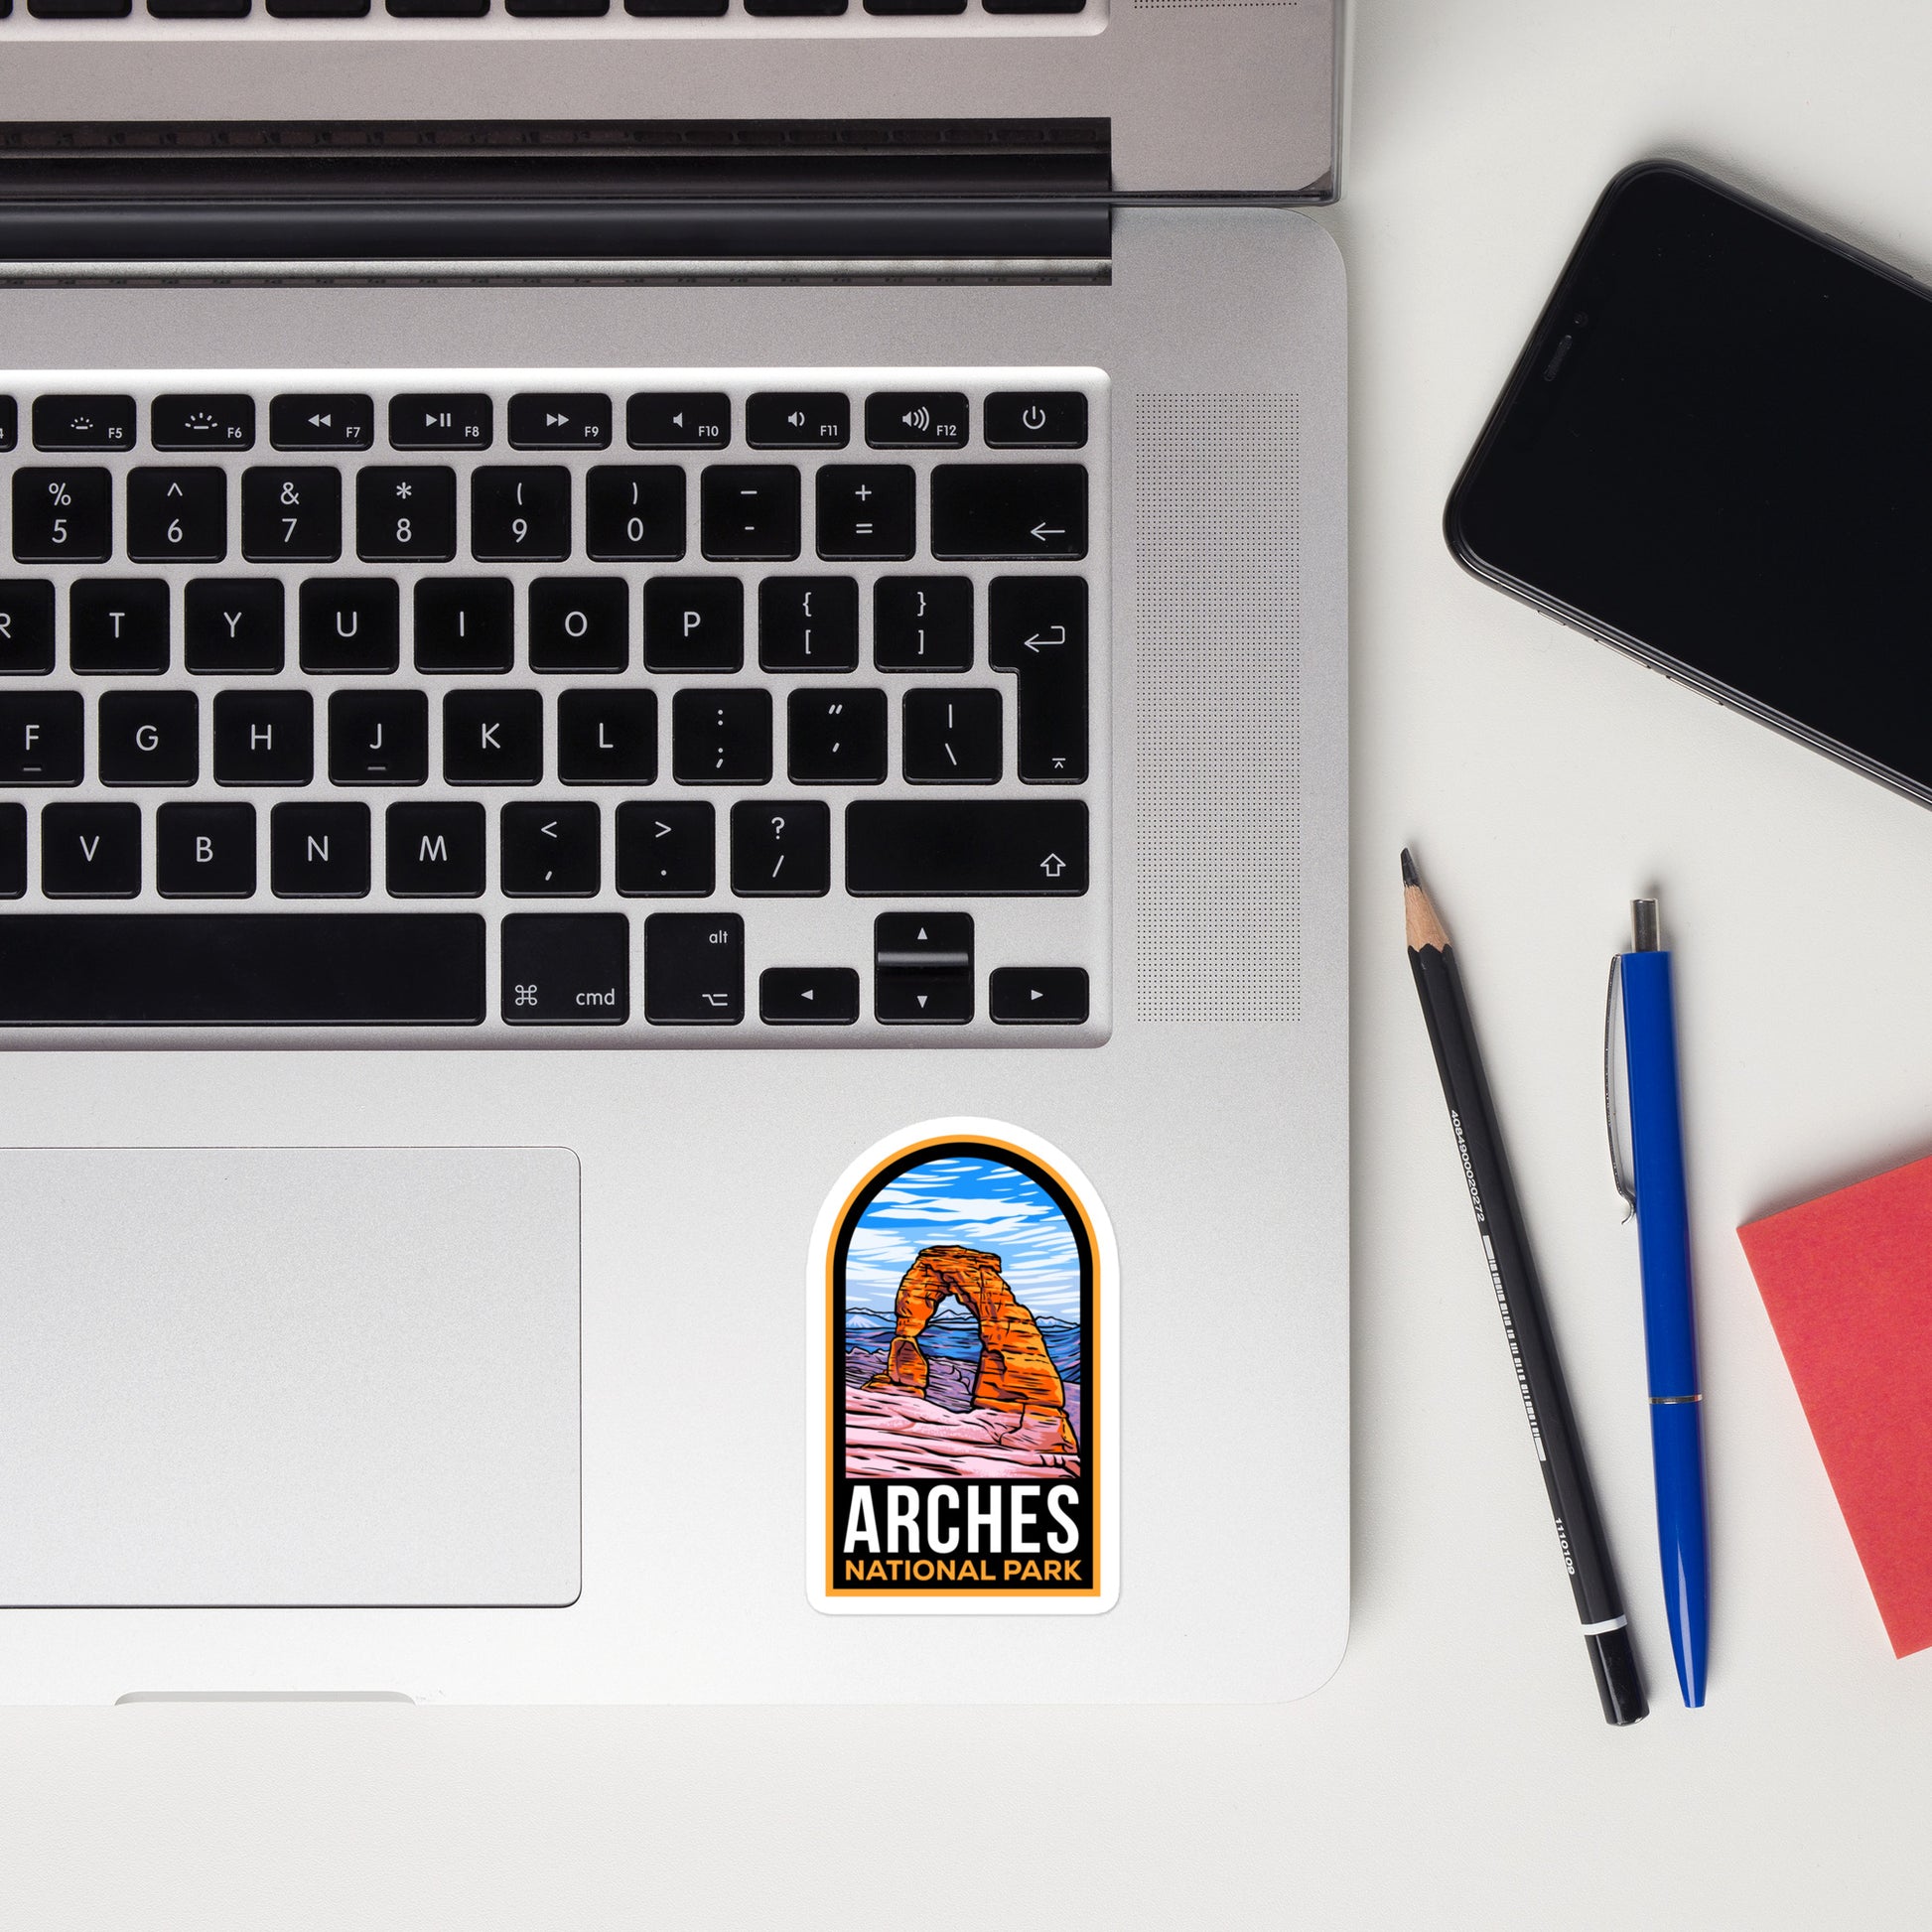 A sticker of Arches National Park on a laptop